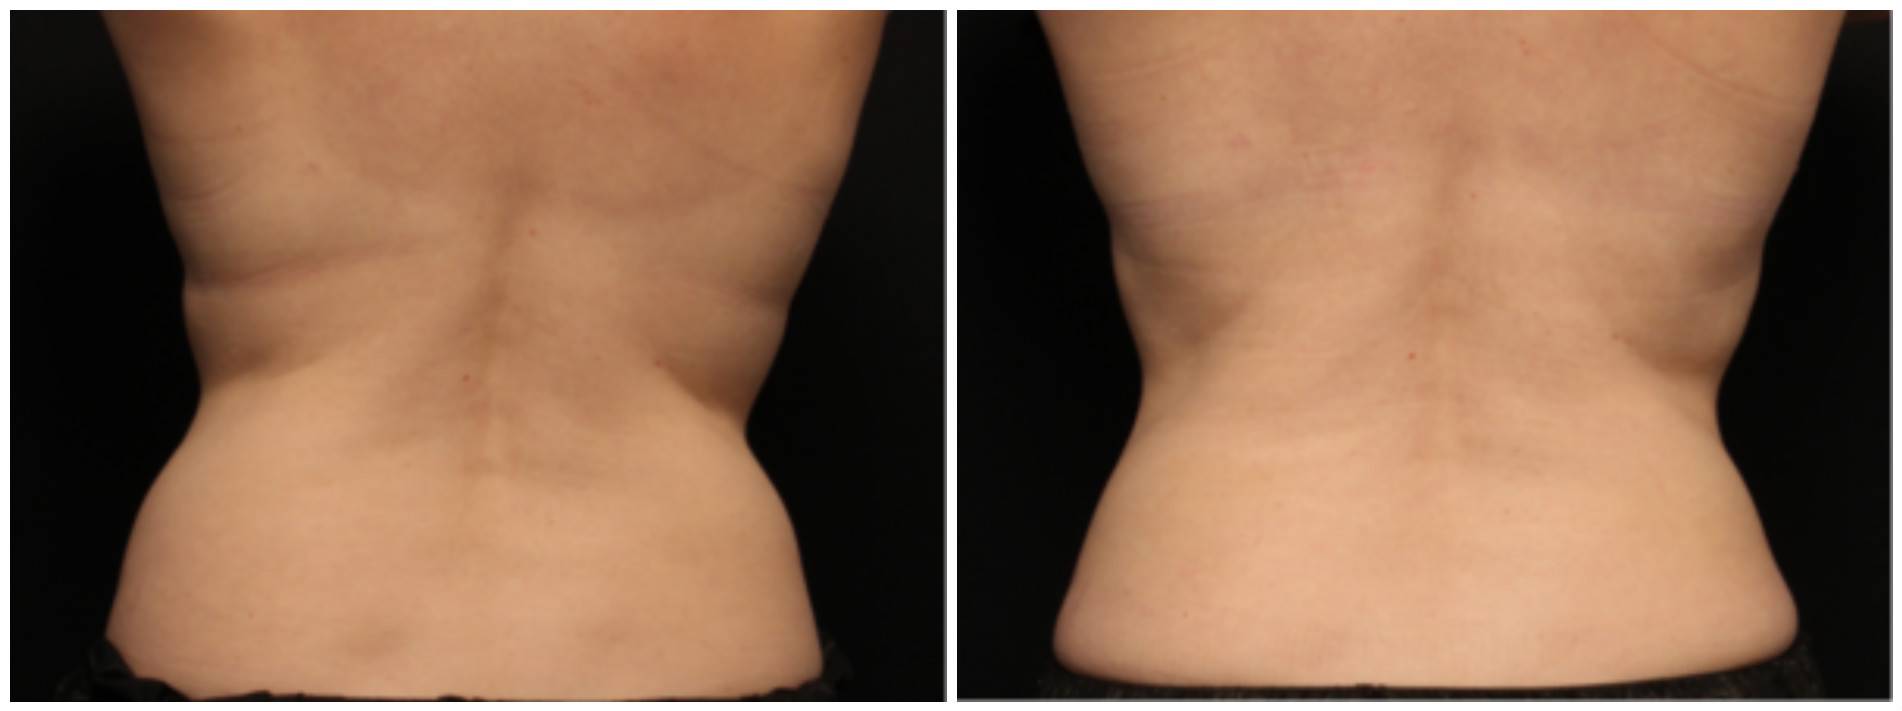 coolsculpting, before and after - back view